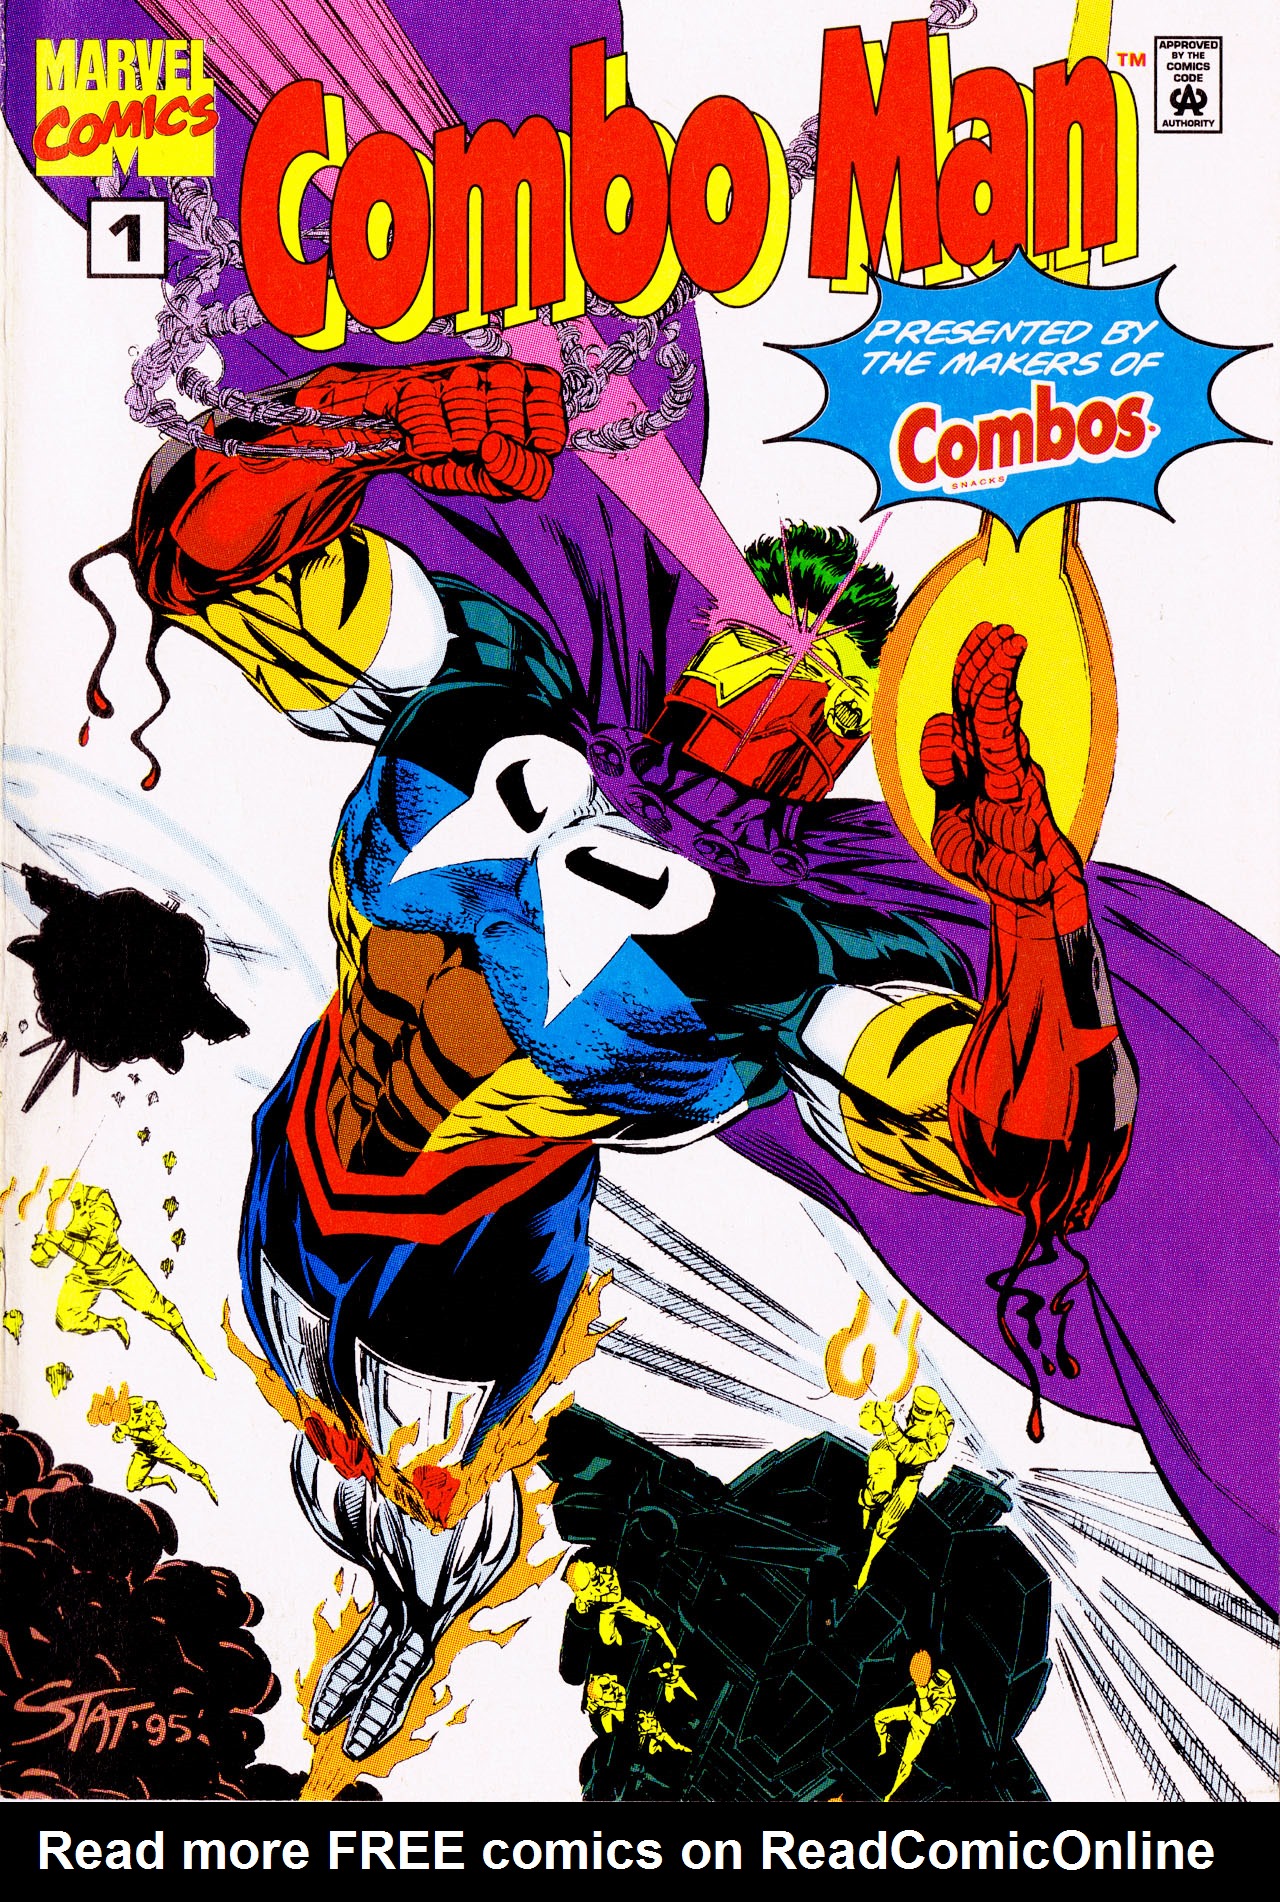 Read online Combo Man comic -  Issue # Full - 1